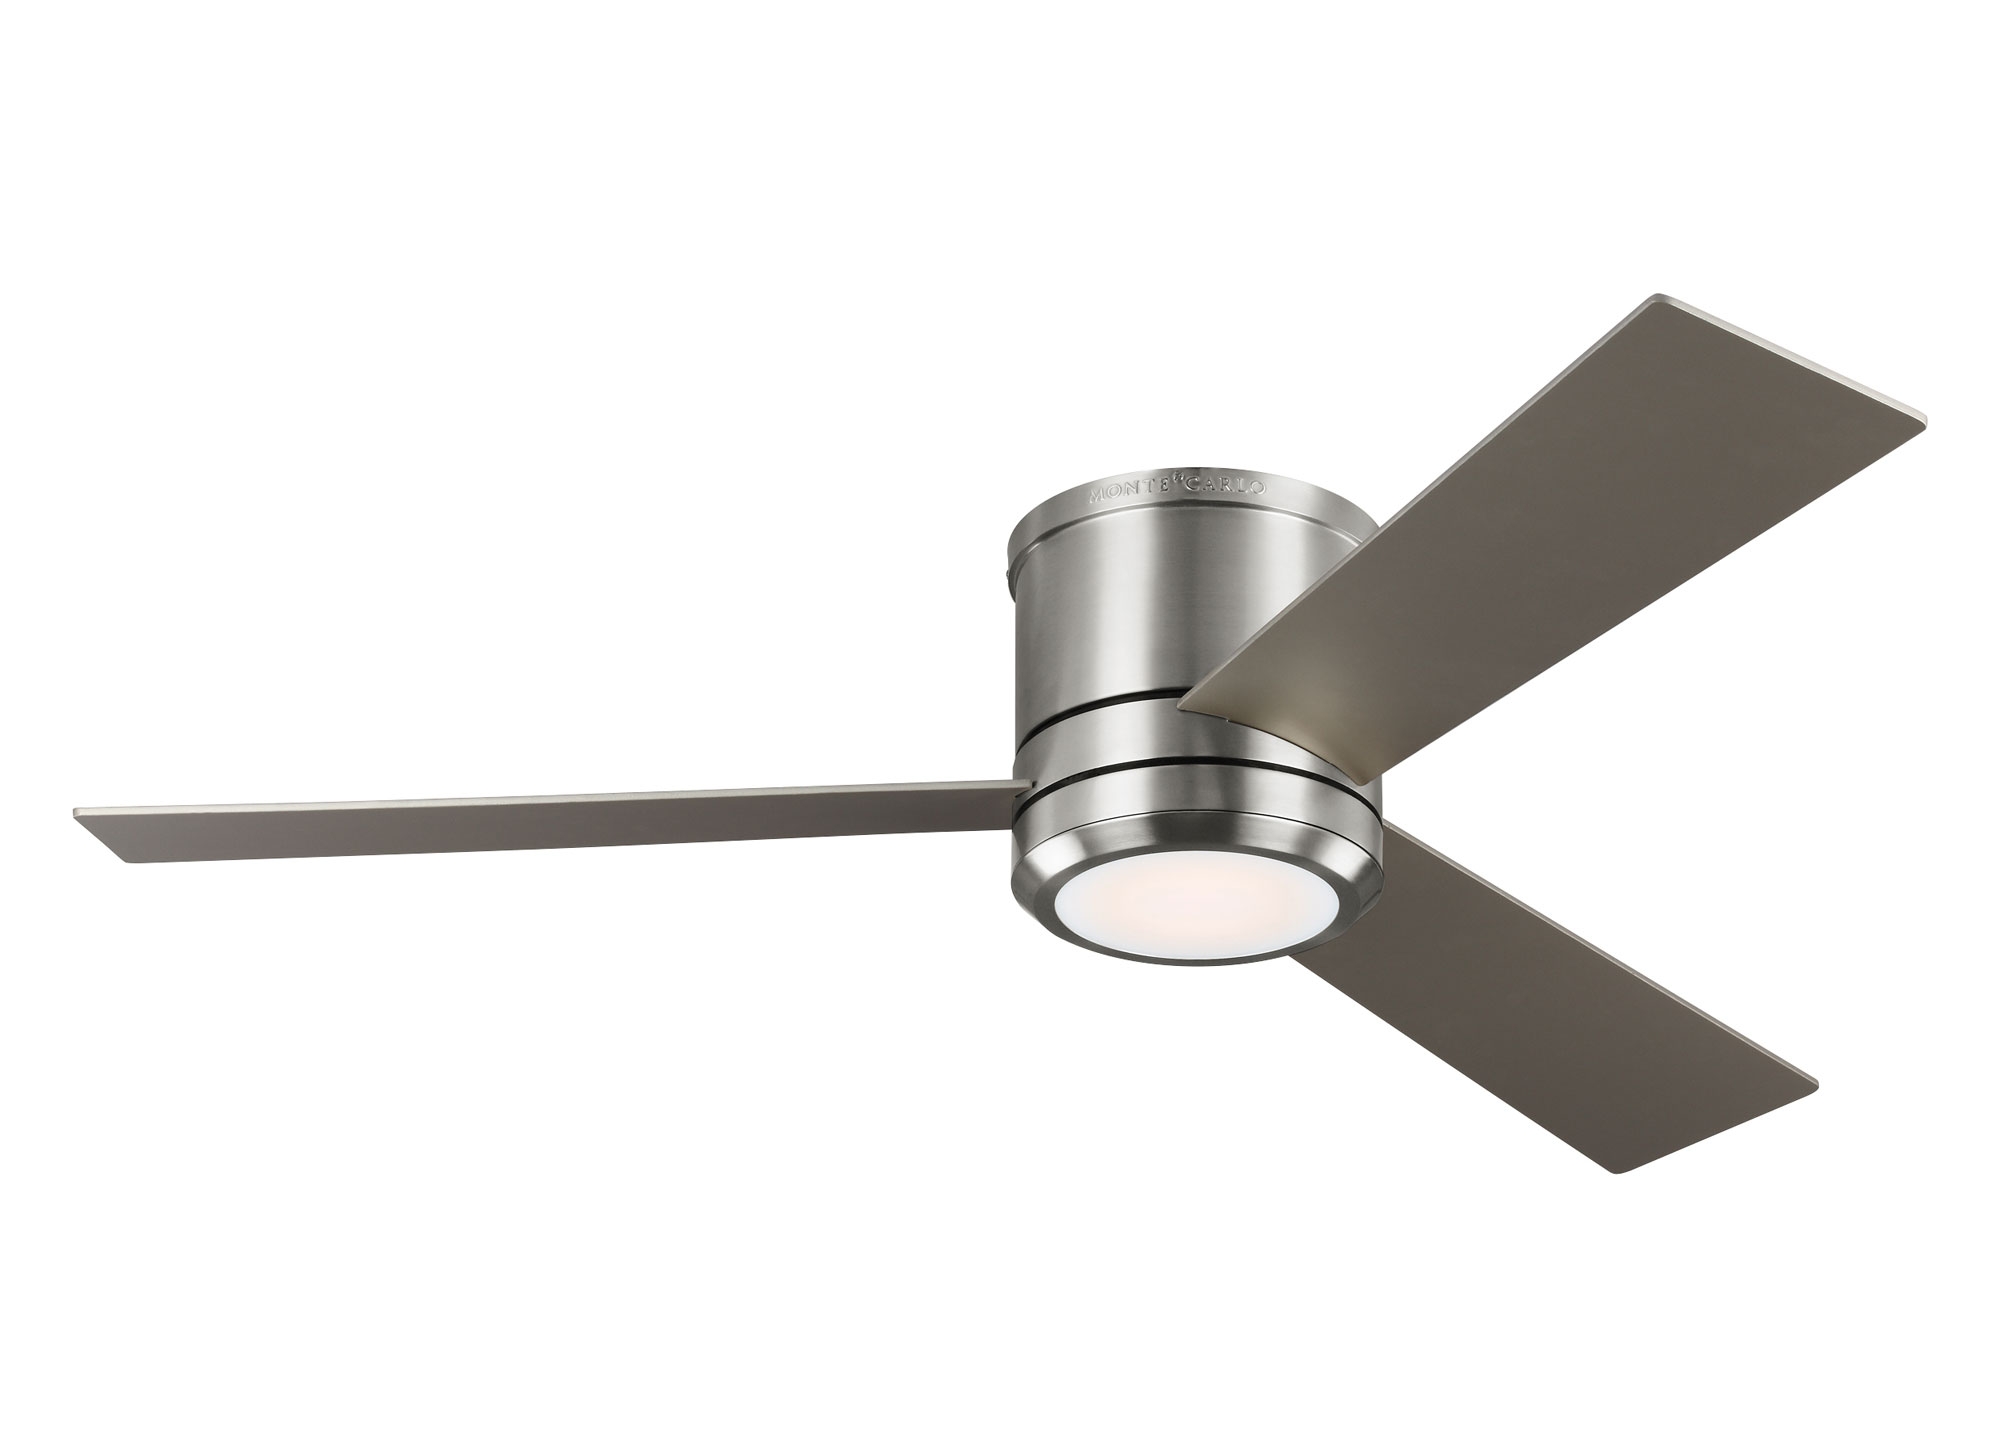 Luminous Ceiling Fan With Led Light And Remoteceiling phenomenal luminous ceiling fans with led lights and